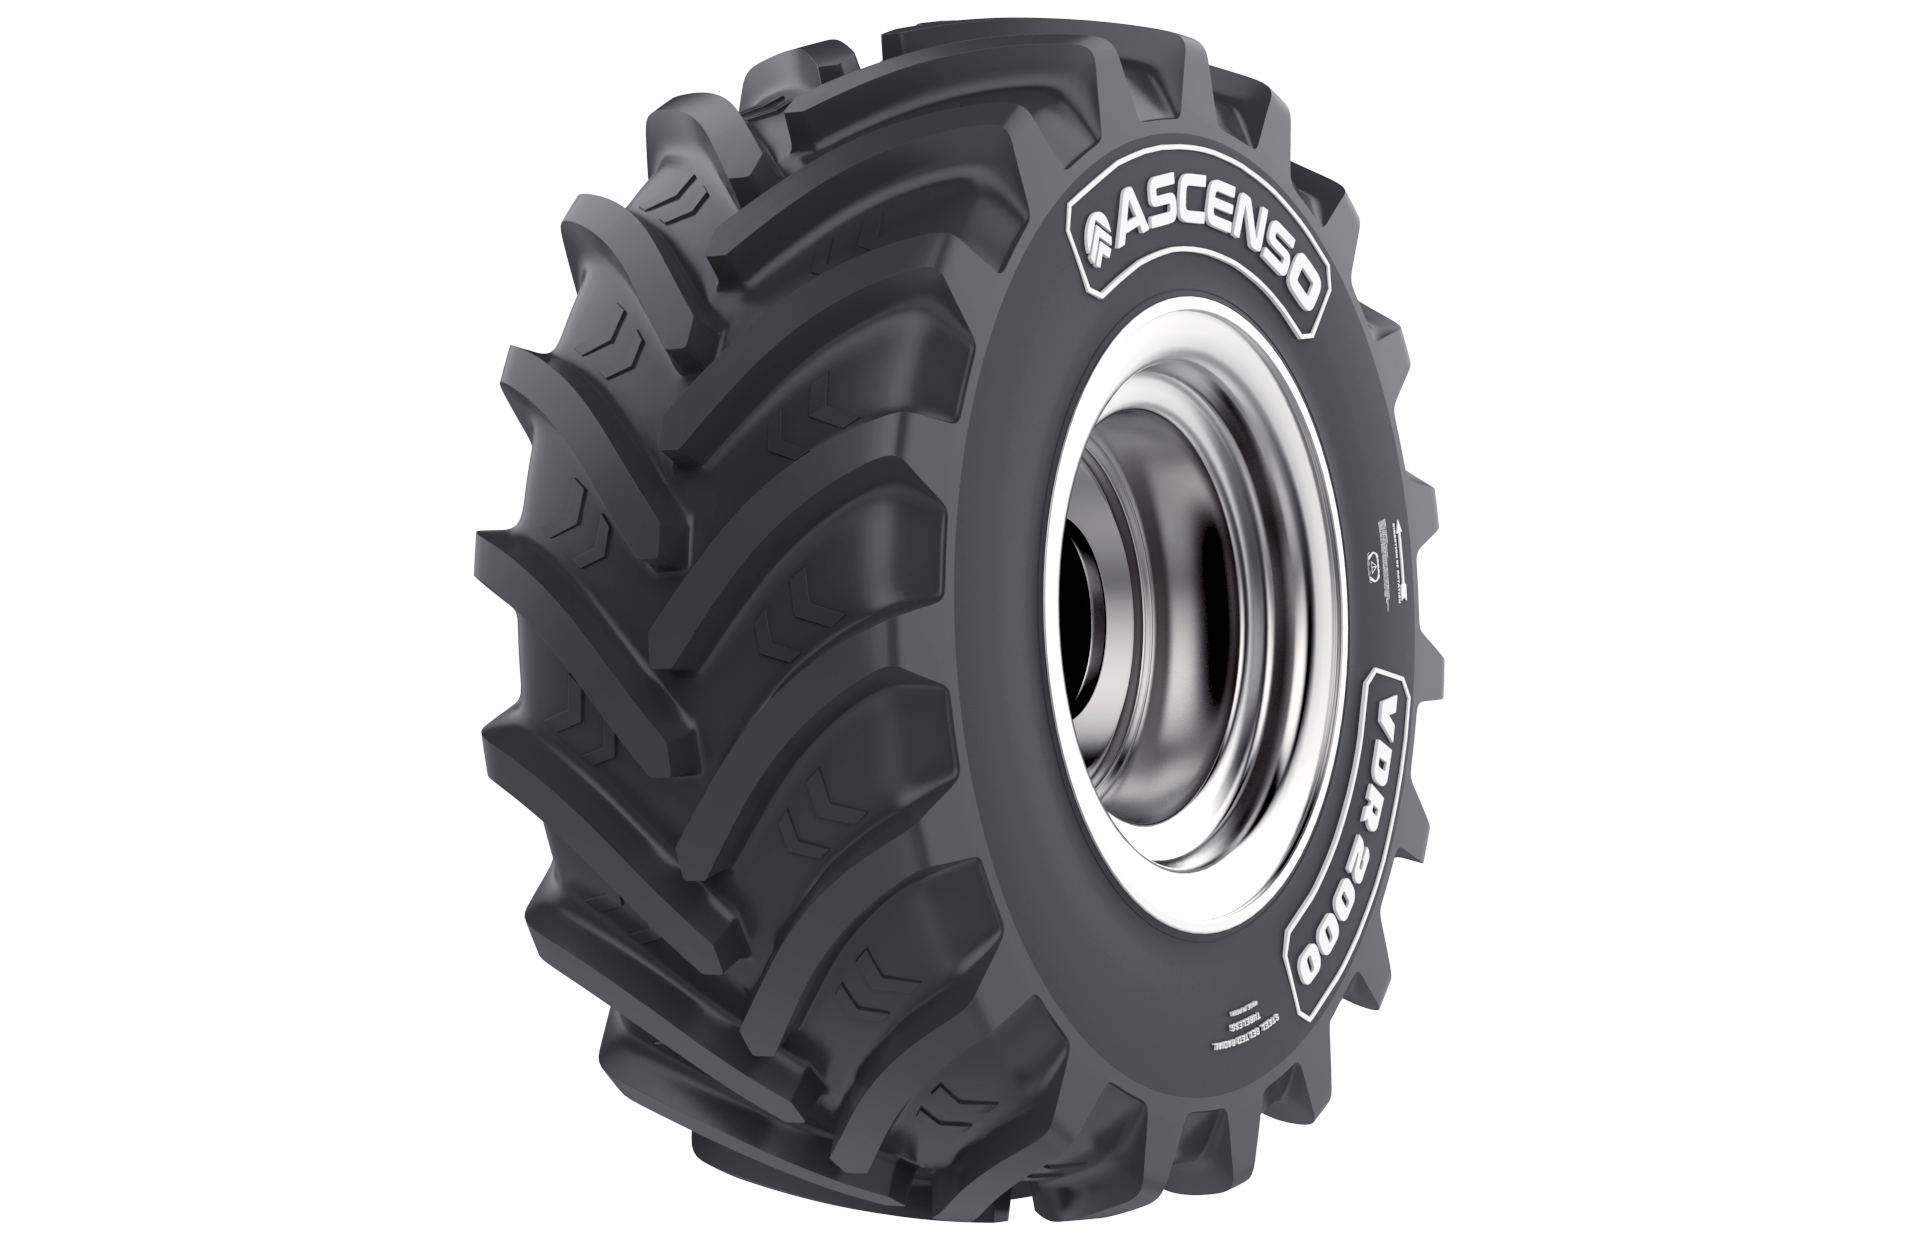 ASCENSO VF 710/60R38 NRO 174D R1-W TL VDR2000 STEEL BELTED